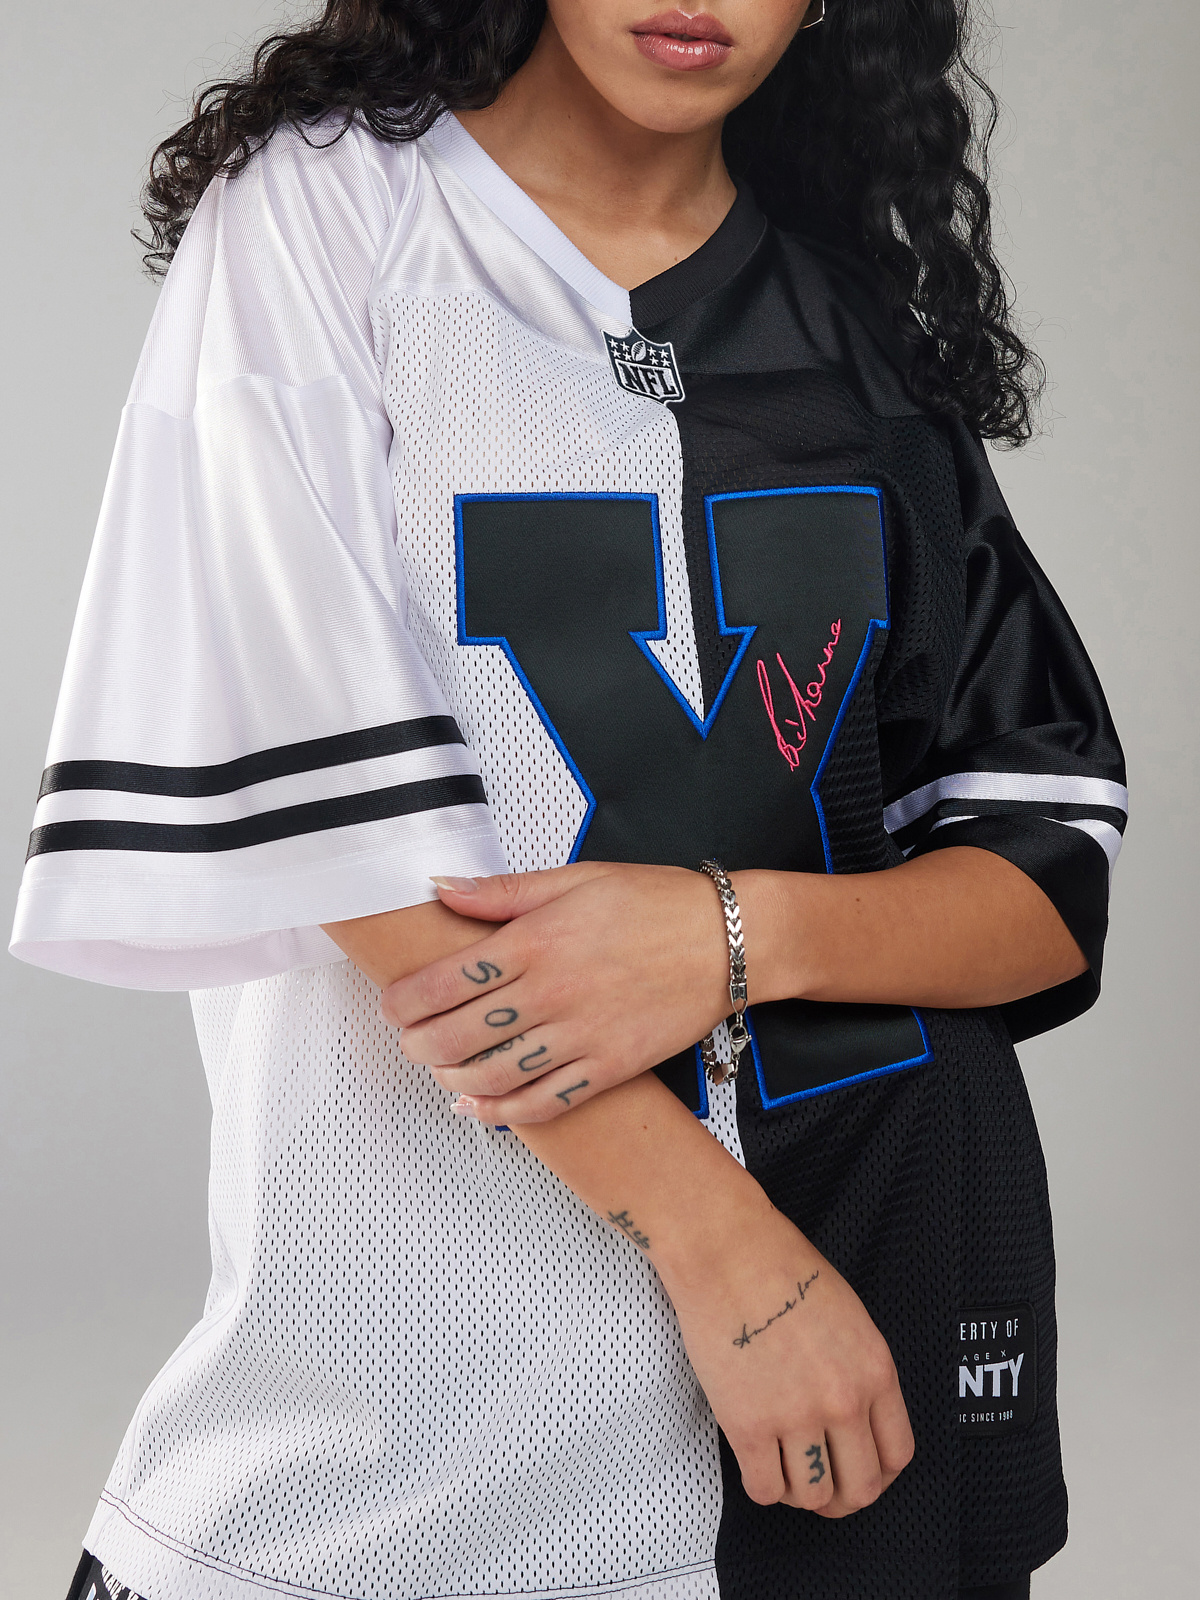 Limited-Edition LVII Two-Tone Varsity Fashion Jersey with NFL Logo